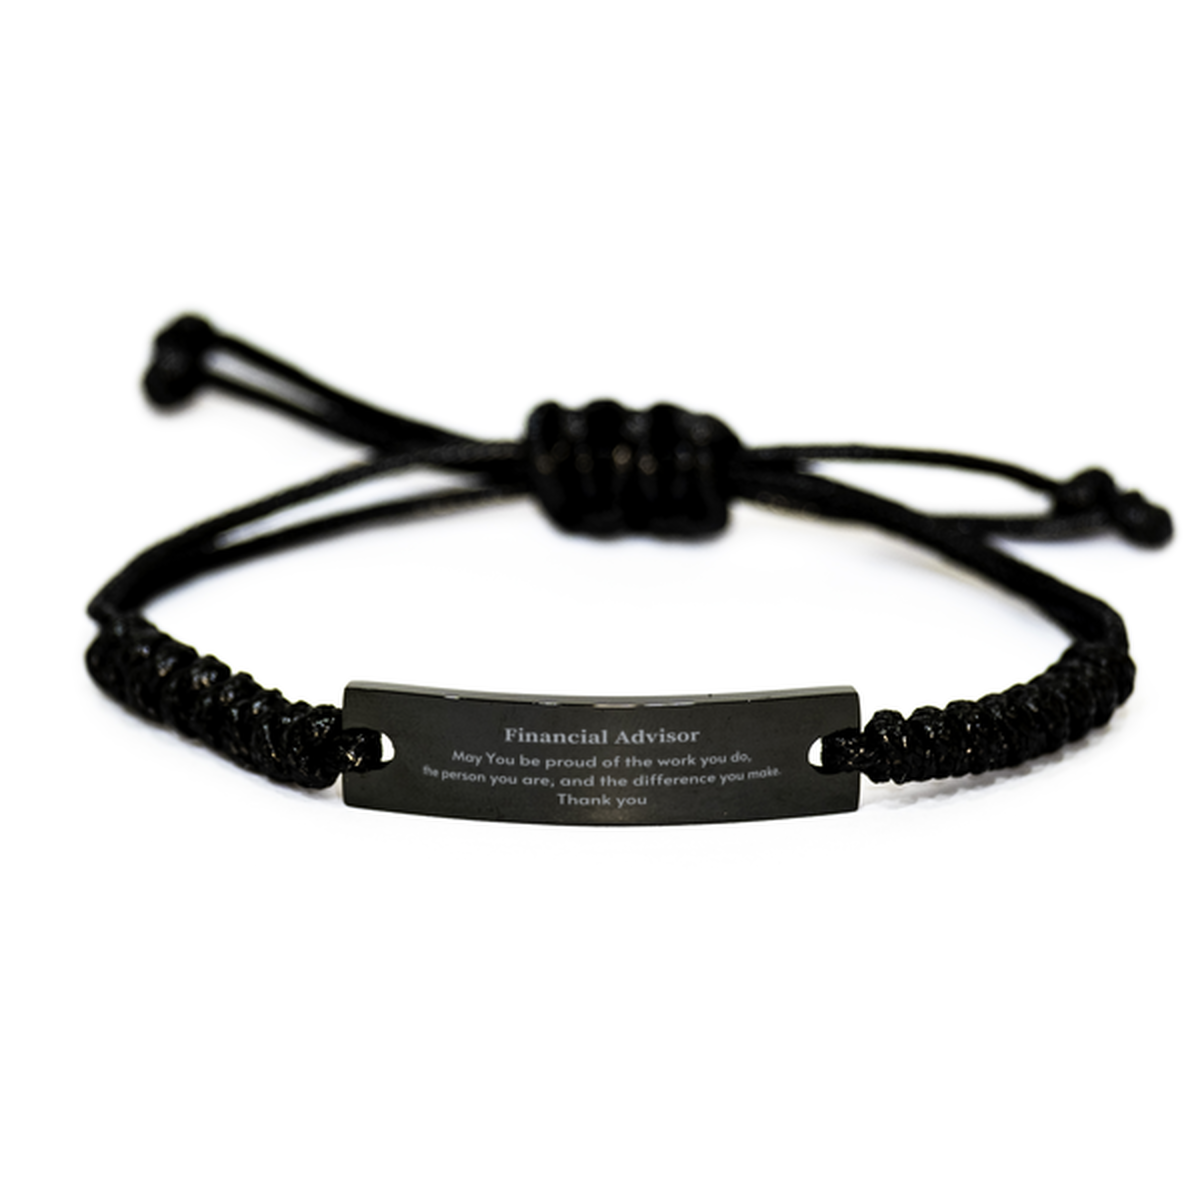 Heartwarming Black Rope Bracelet Retirement Coworkers Gifts for Financial Advisor, Financial Advisor May You be proud of the work you do, the person you are Gifts for Boss Men Women Friends